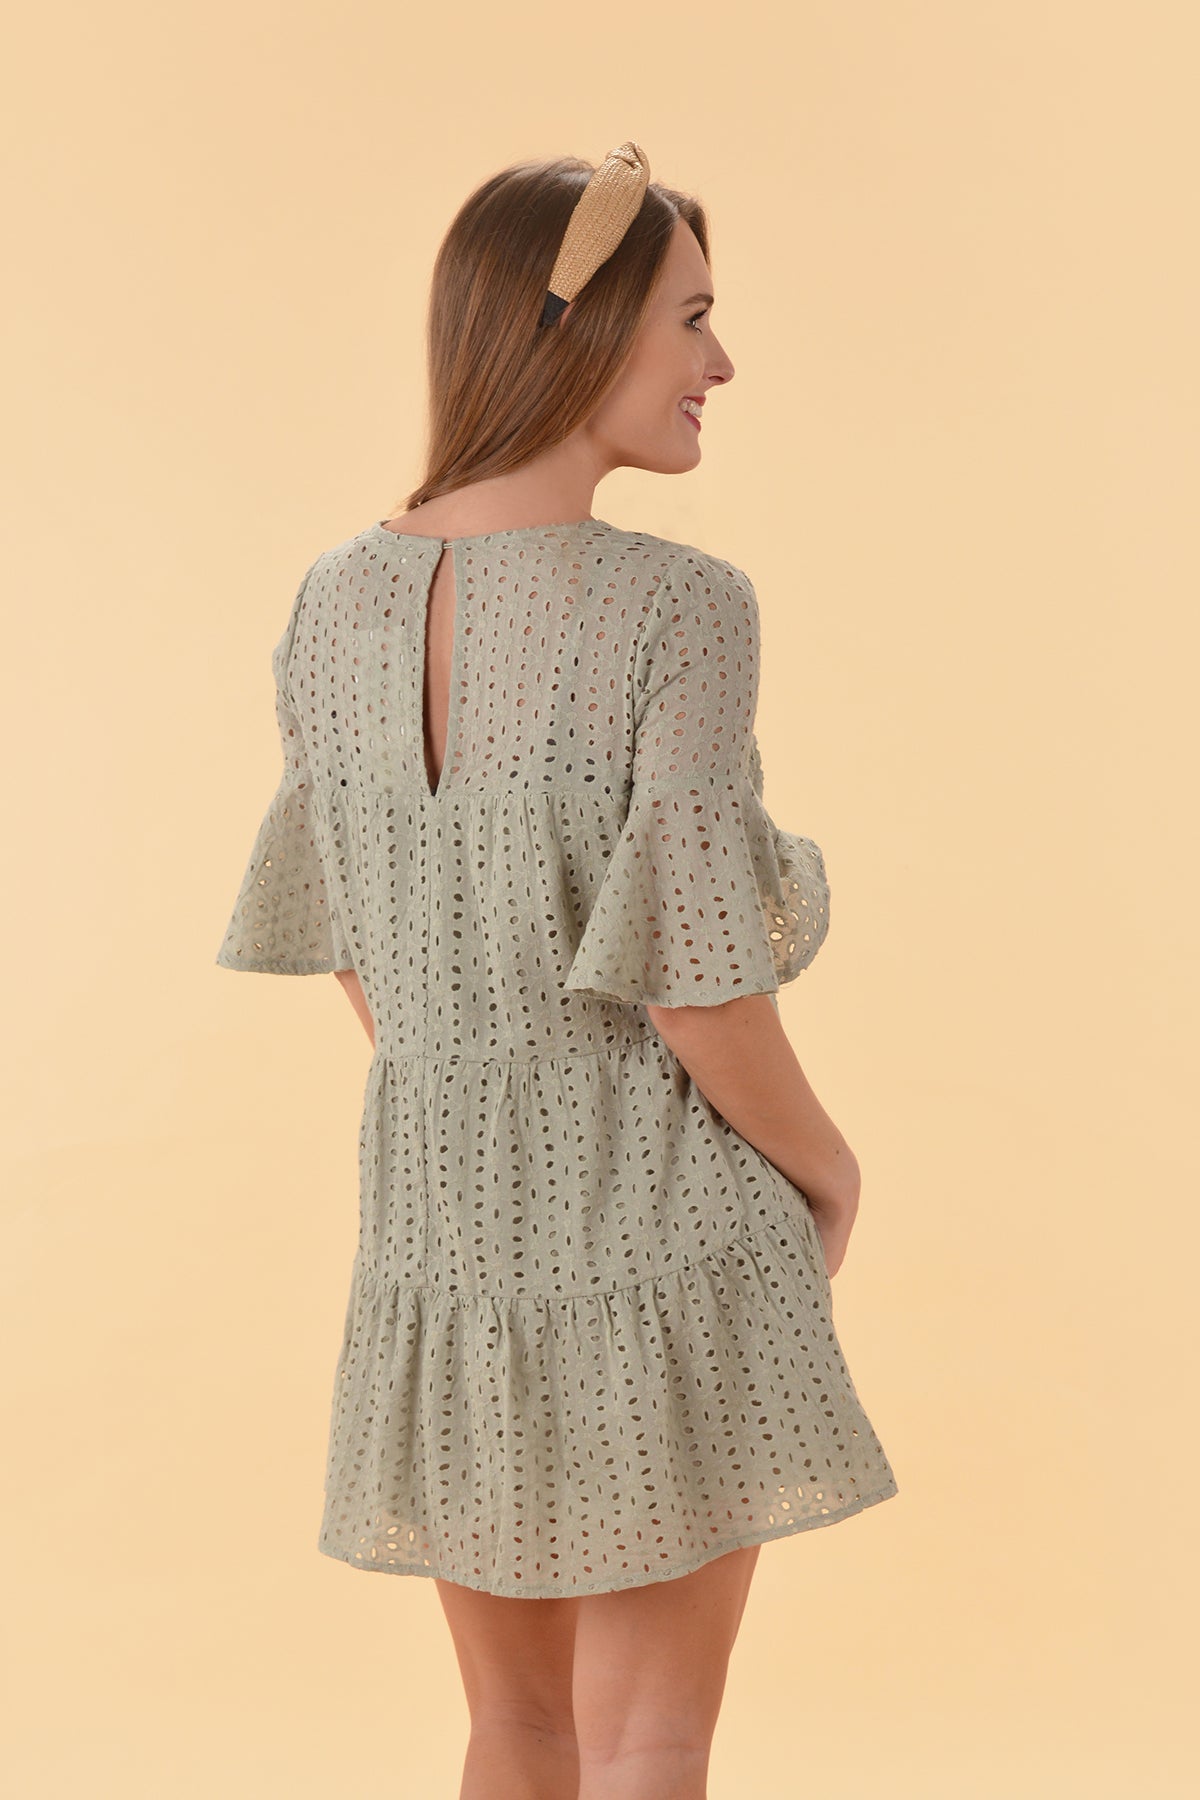 DREAMING OF SPRING DRESS - Dear Stella Boutique